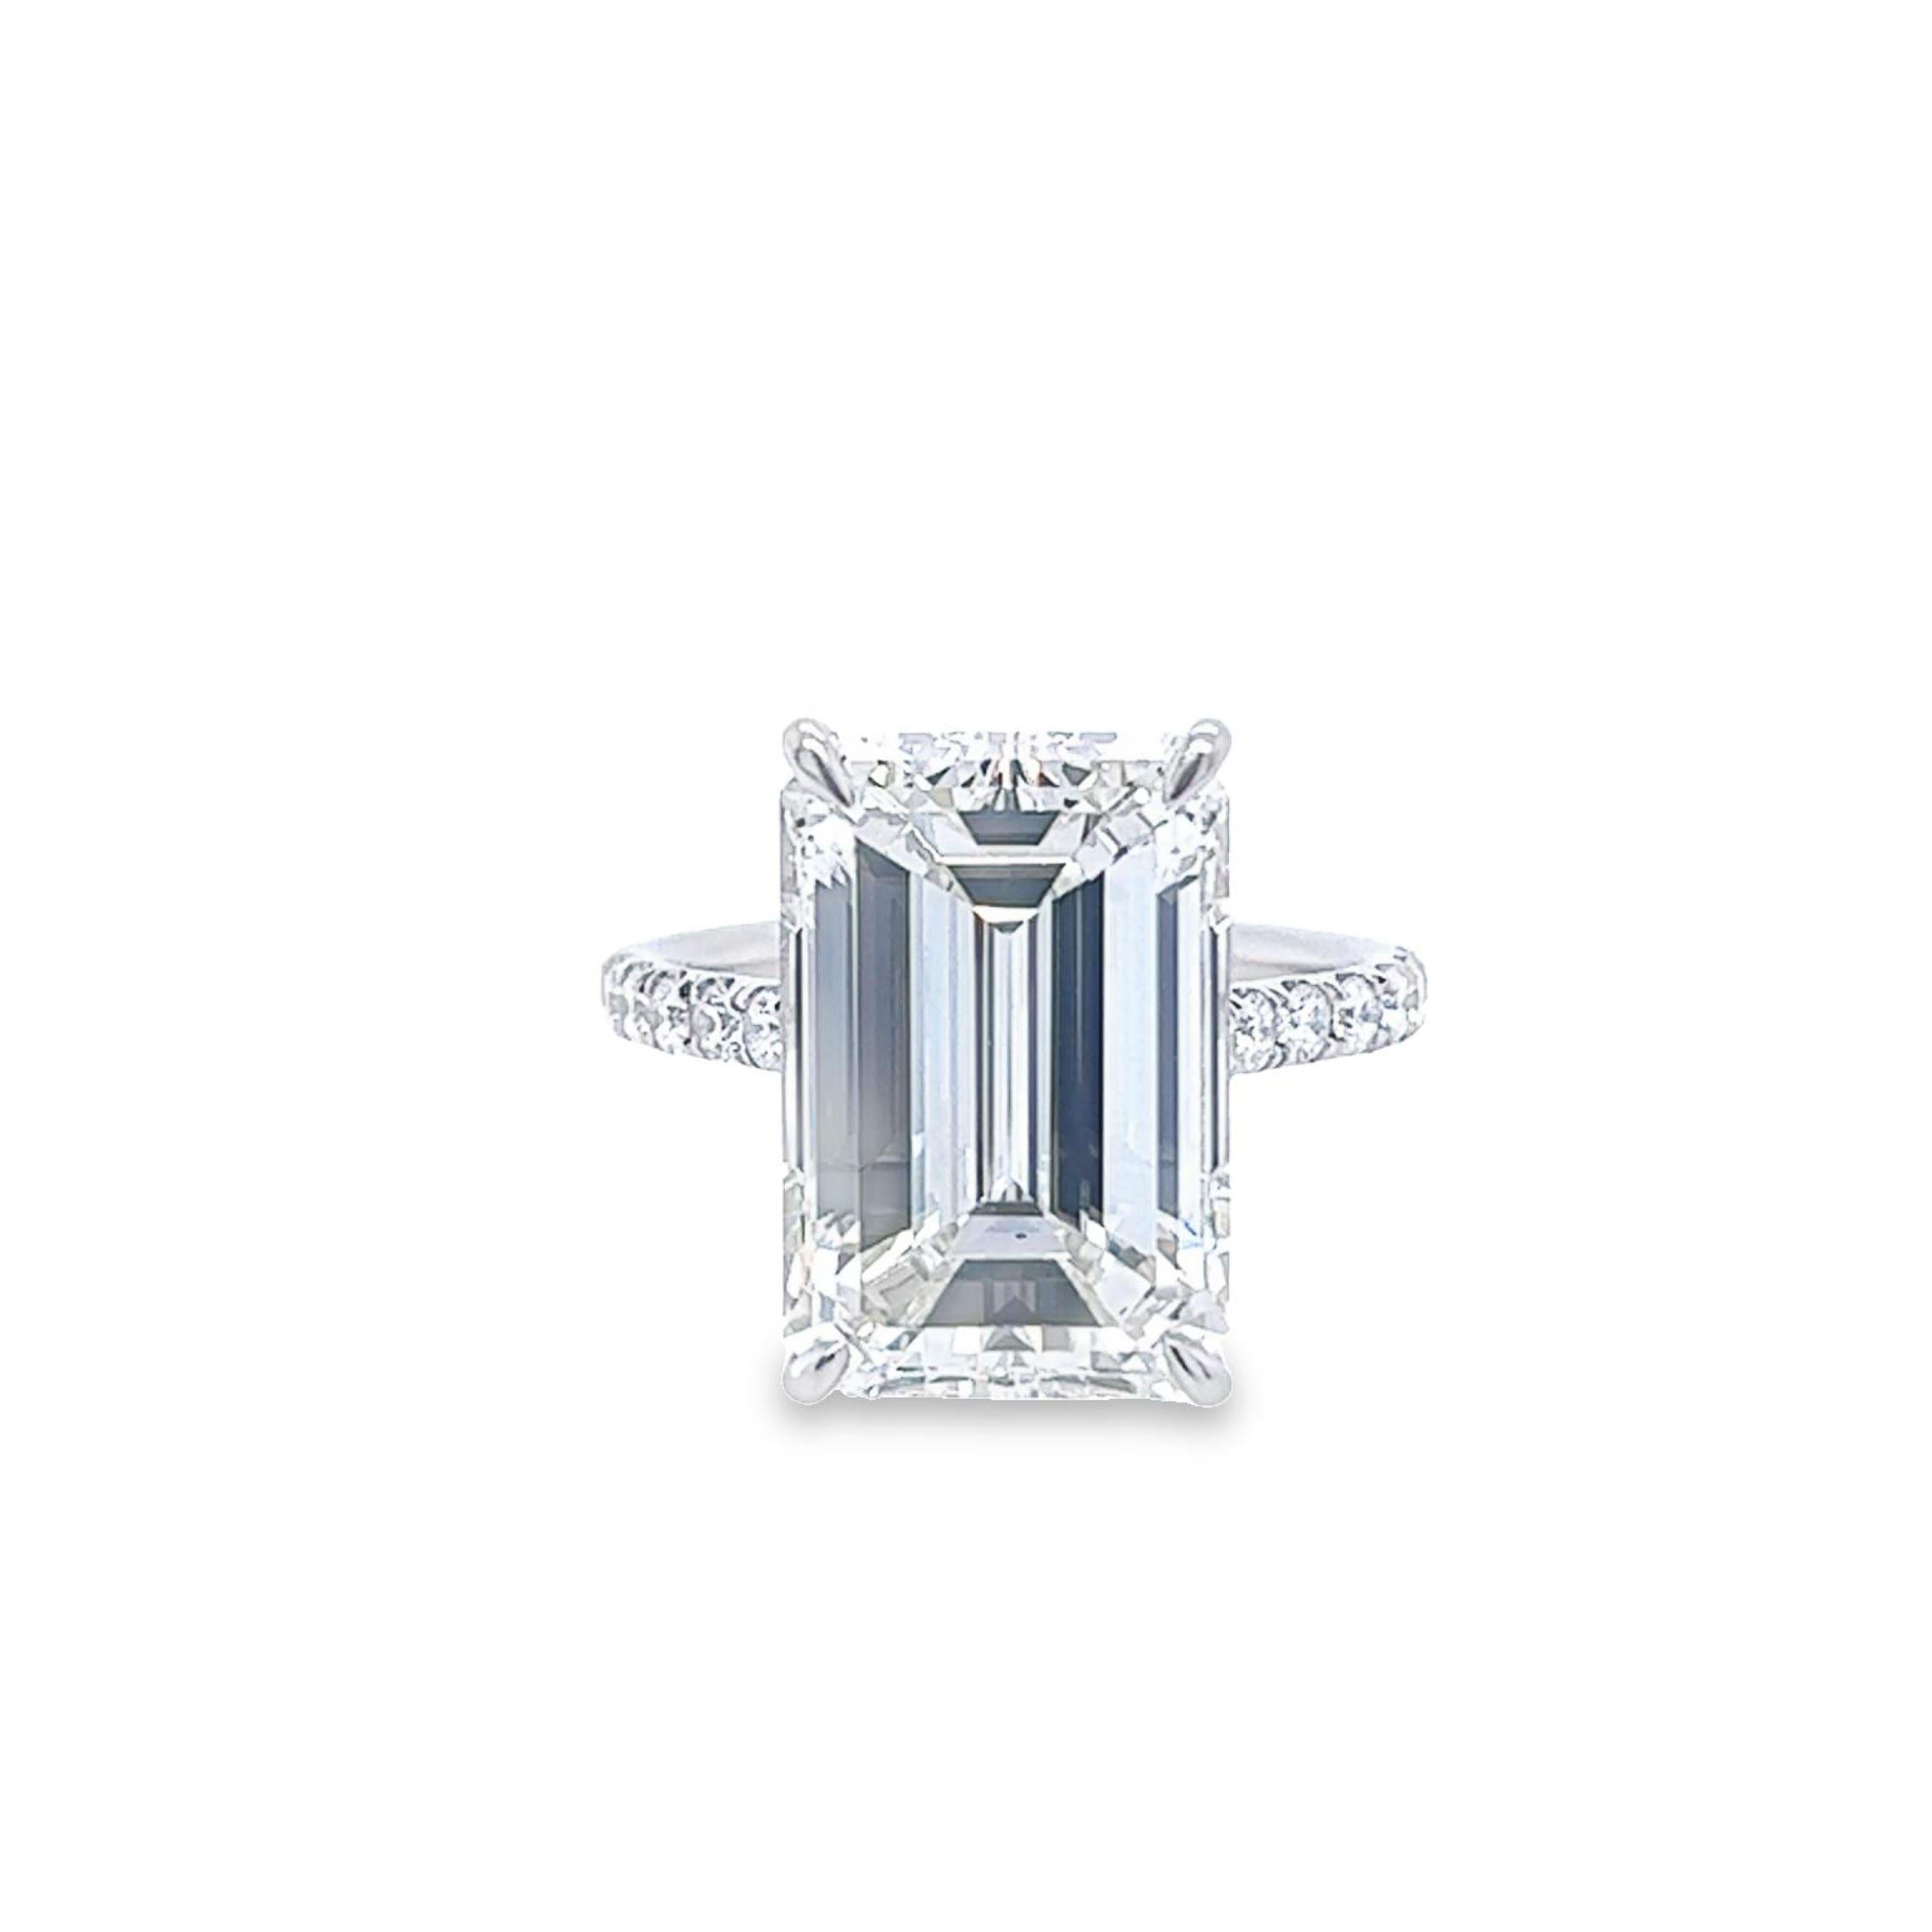 Rosenberg Diamonds & Co. 10.86 carat Emerald cut I color VS2 clarity is accompanied by a GIA certificate. This breathtaking Emerald is full of brilliance and it is set in a handmade platinum setting and continues its elegance with a row of micro